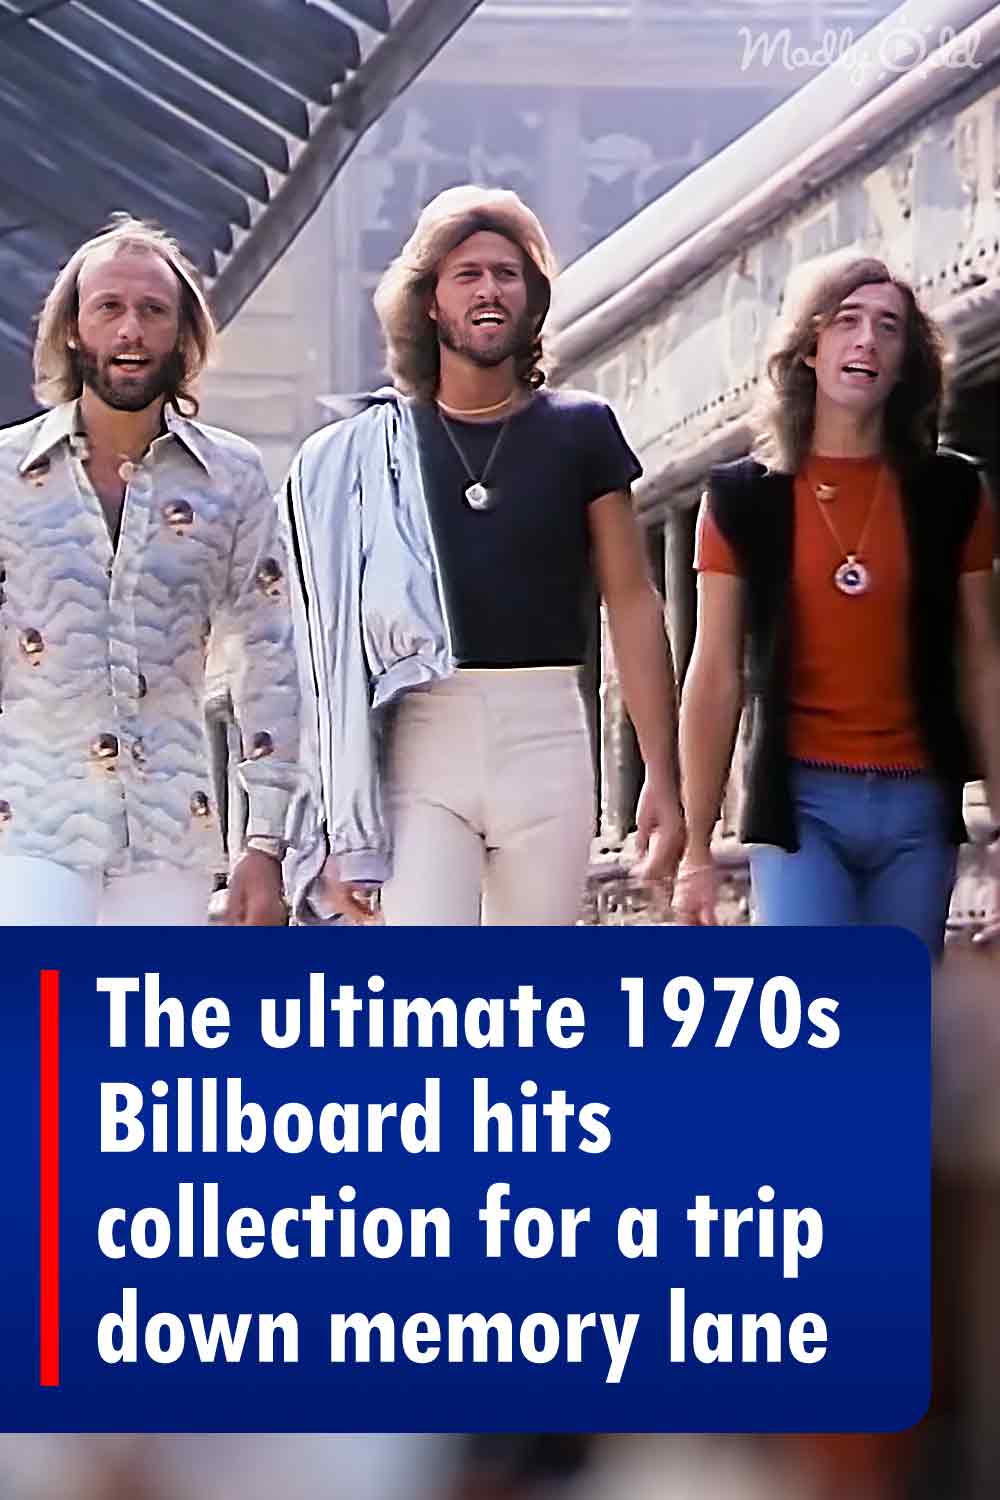 The ultimate 1970s Billboard hits collection for a trip down memory lane